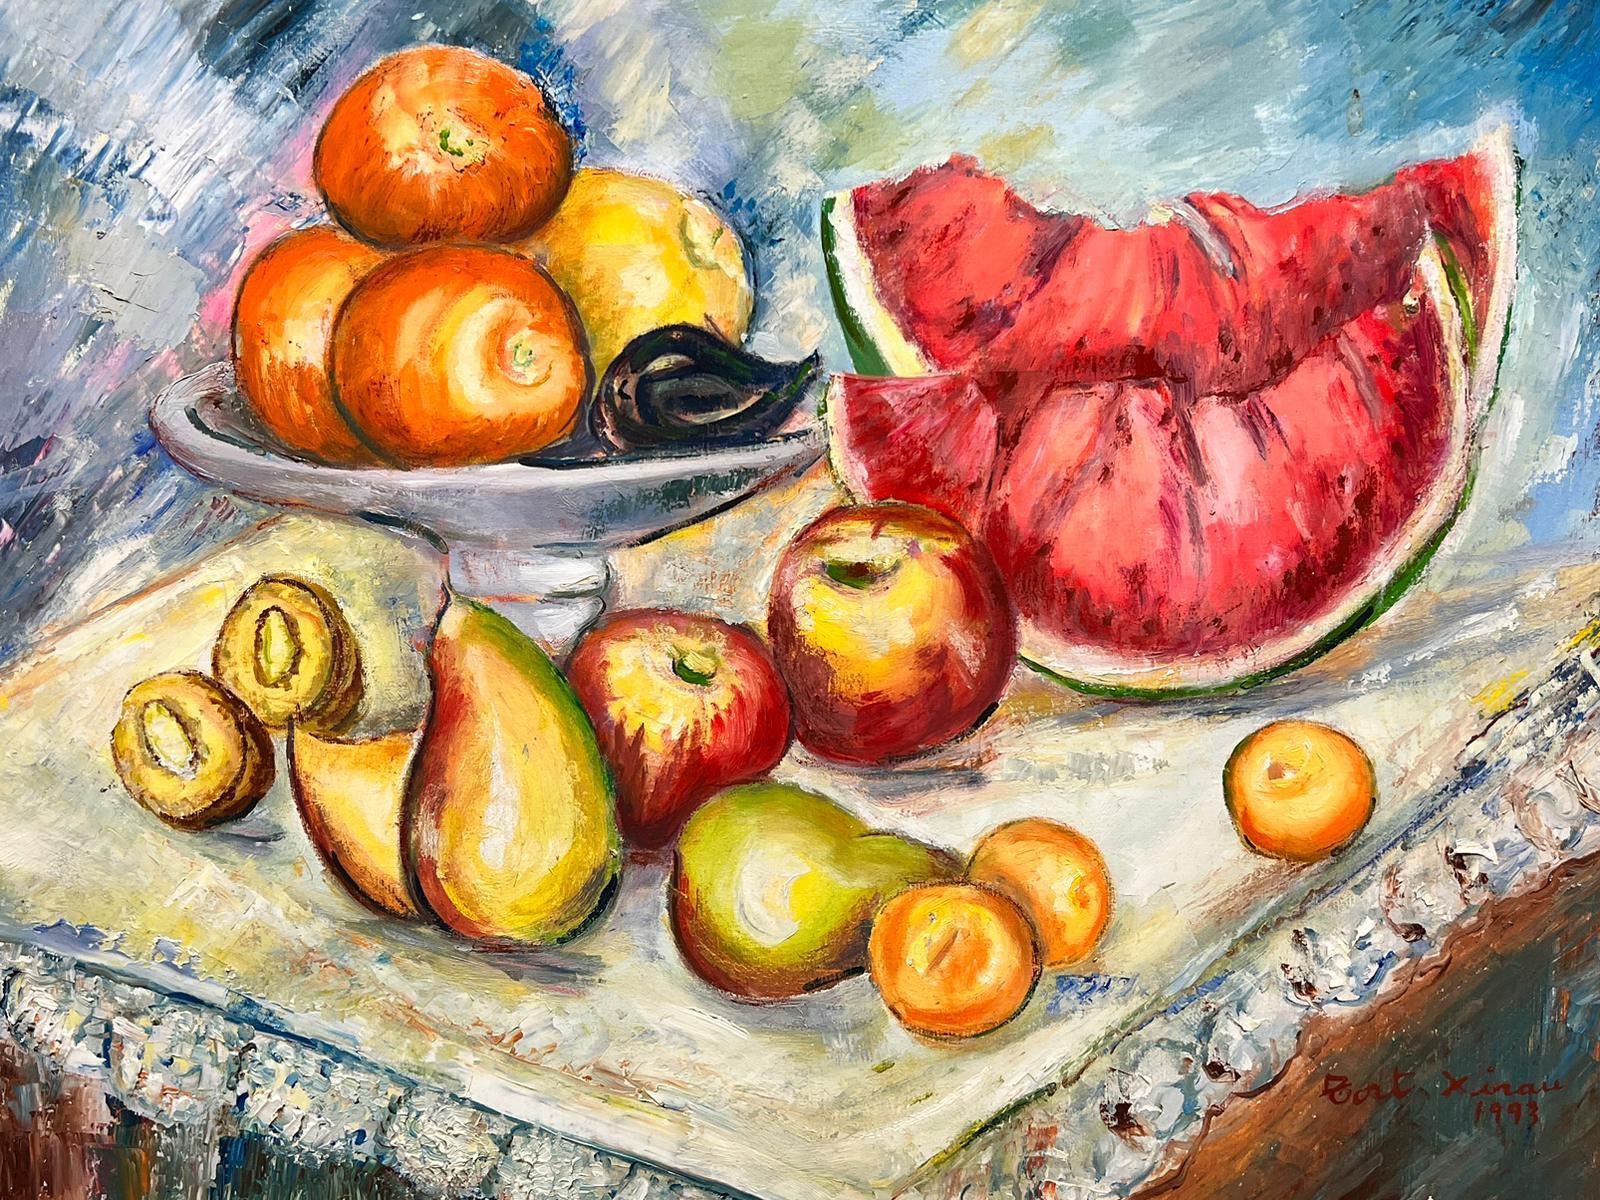 Fruit
by Maria Tort Xirau (Catalan, 1924-2018)
signed lower corner
dated 1993
oil painting on canvas, framed

framed: 24 x 33 inches
canvas: 20 x 29 inches

Very good condition. 

Provenance: private collection

Maria Tort Xirau ( Figueres , 26 May